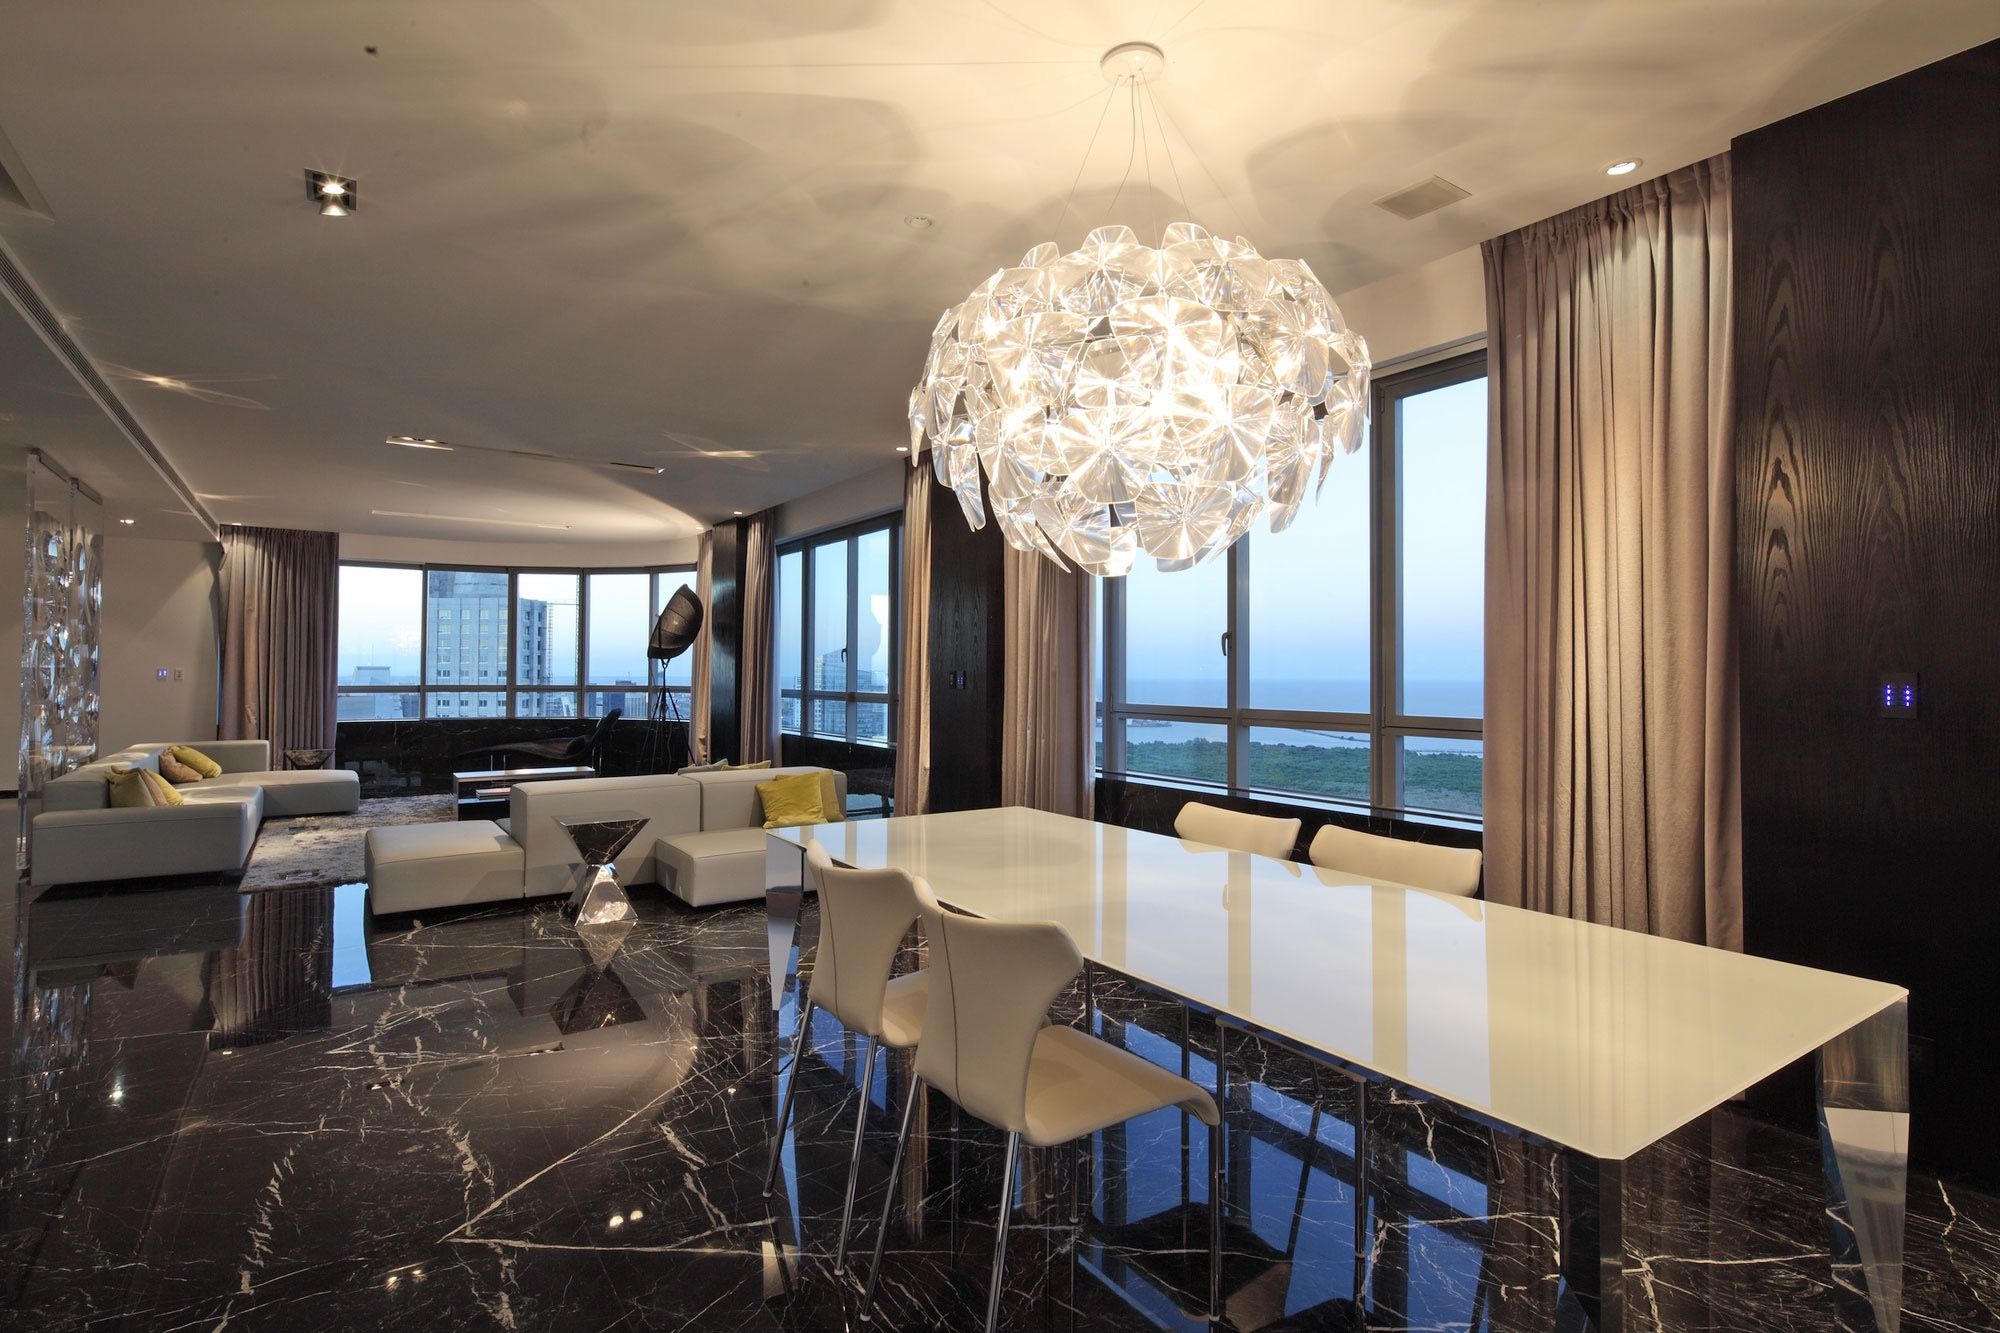 Luxury Crystal Chandelier For The Living Room Contemporary Design  (View 13 of 18)